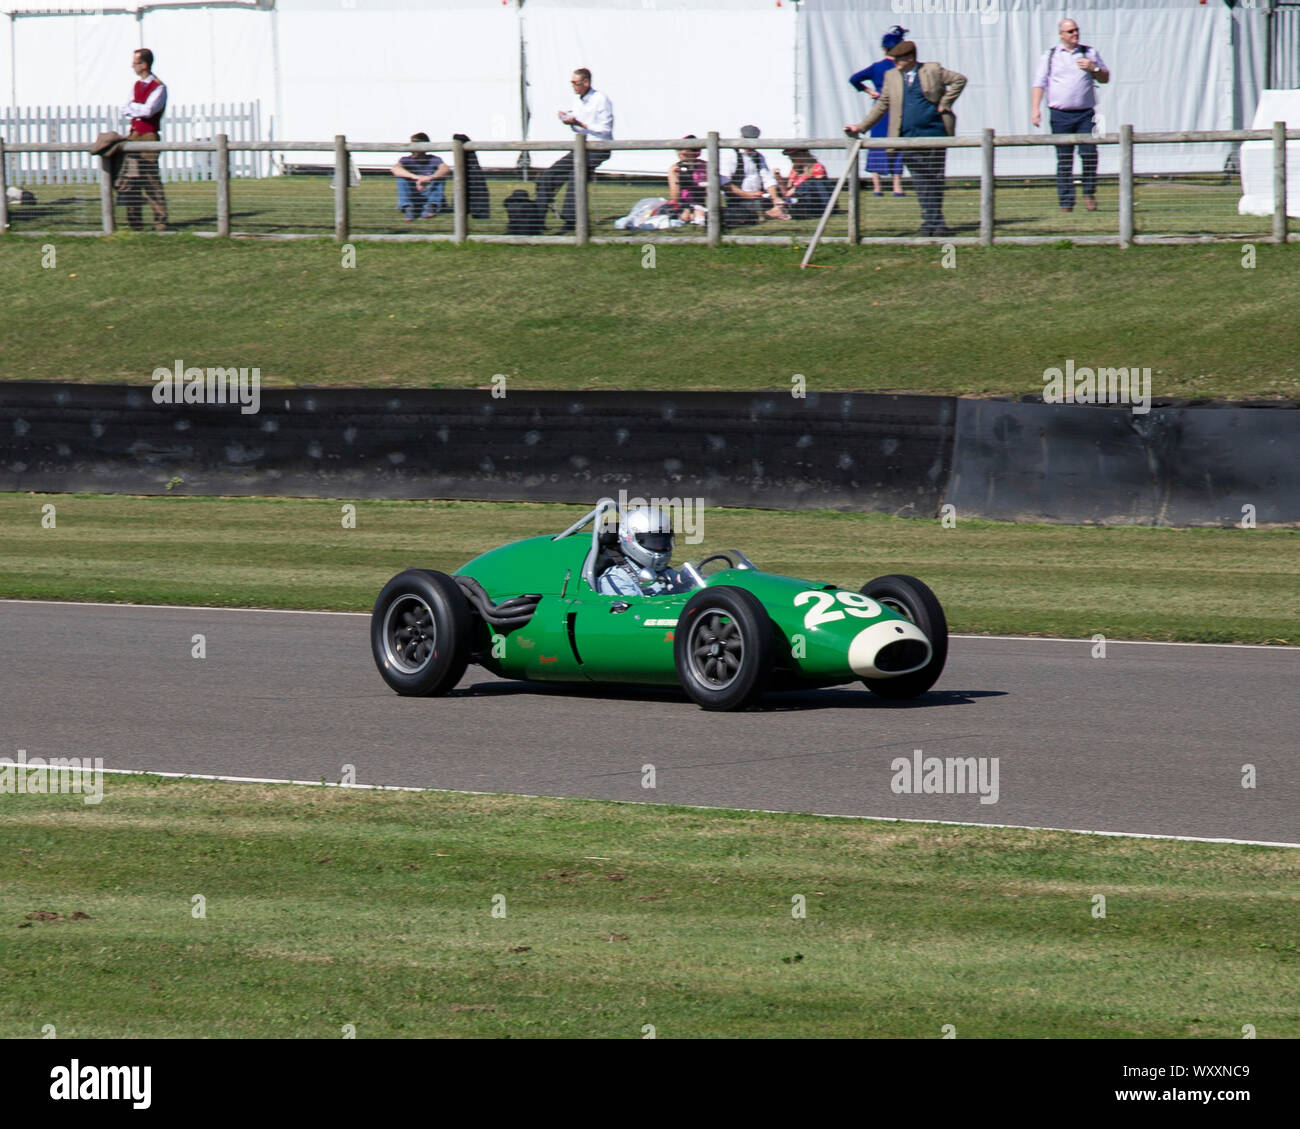 A Cooper Climax T51 Brand Prix racing car at the 2019 Goodwood Revival Stock Photo